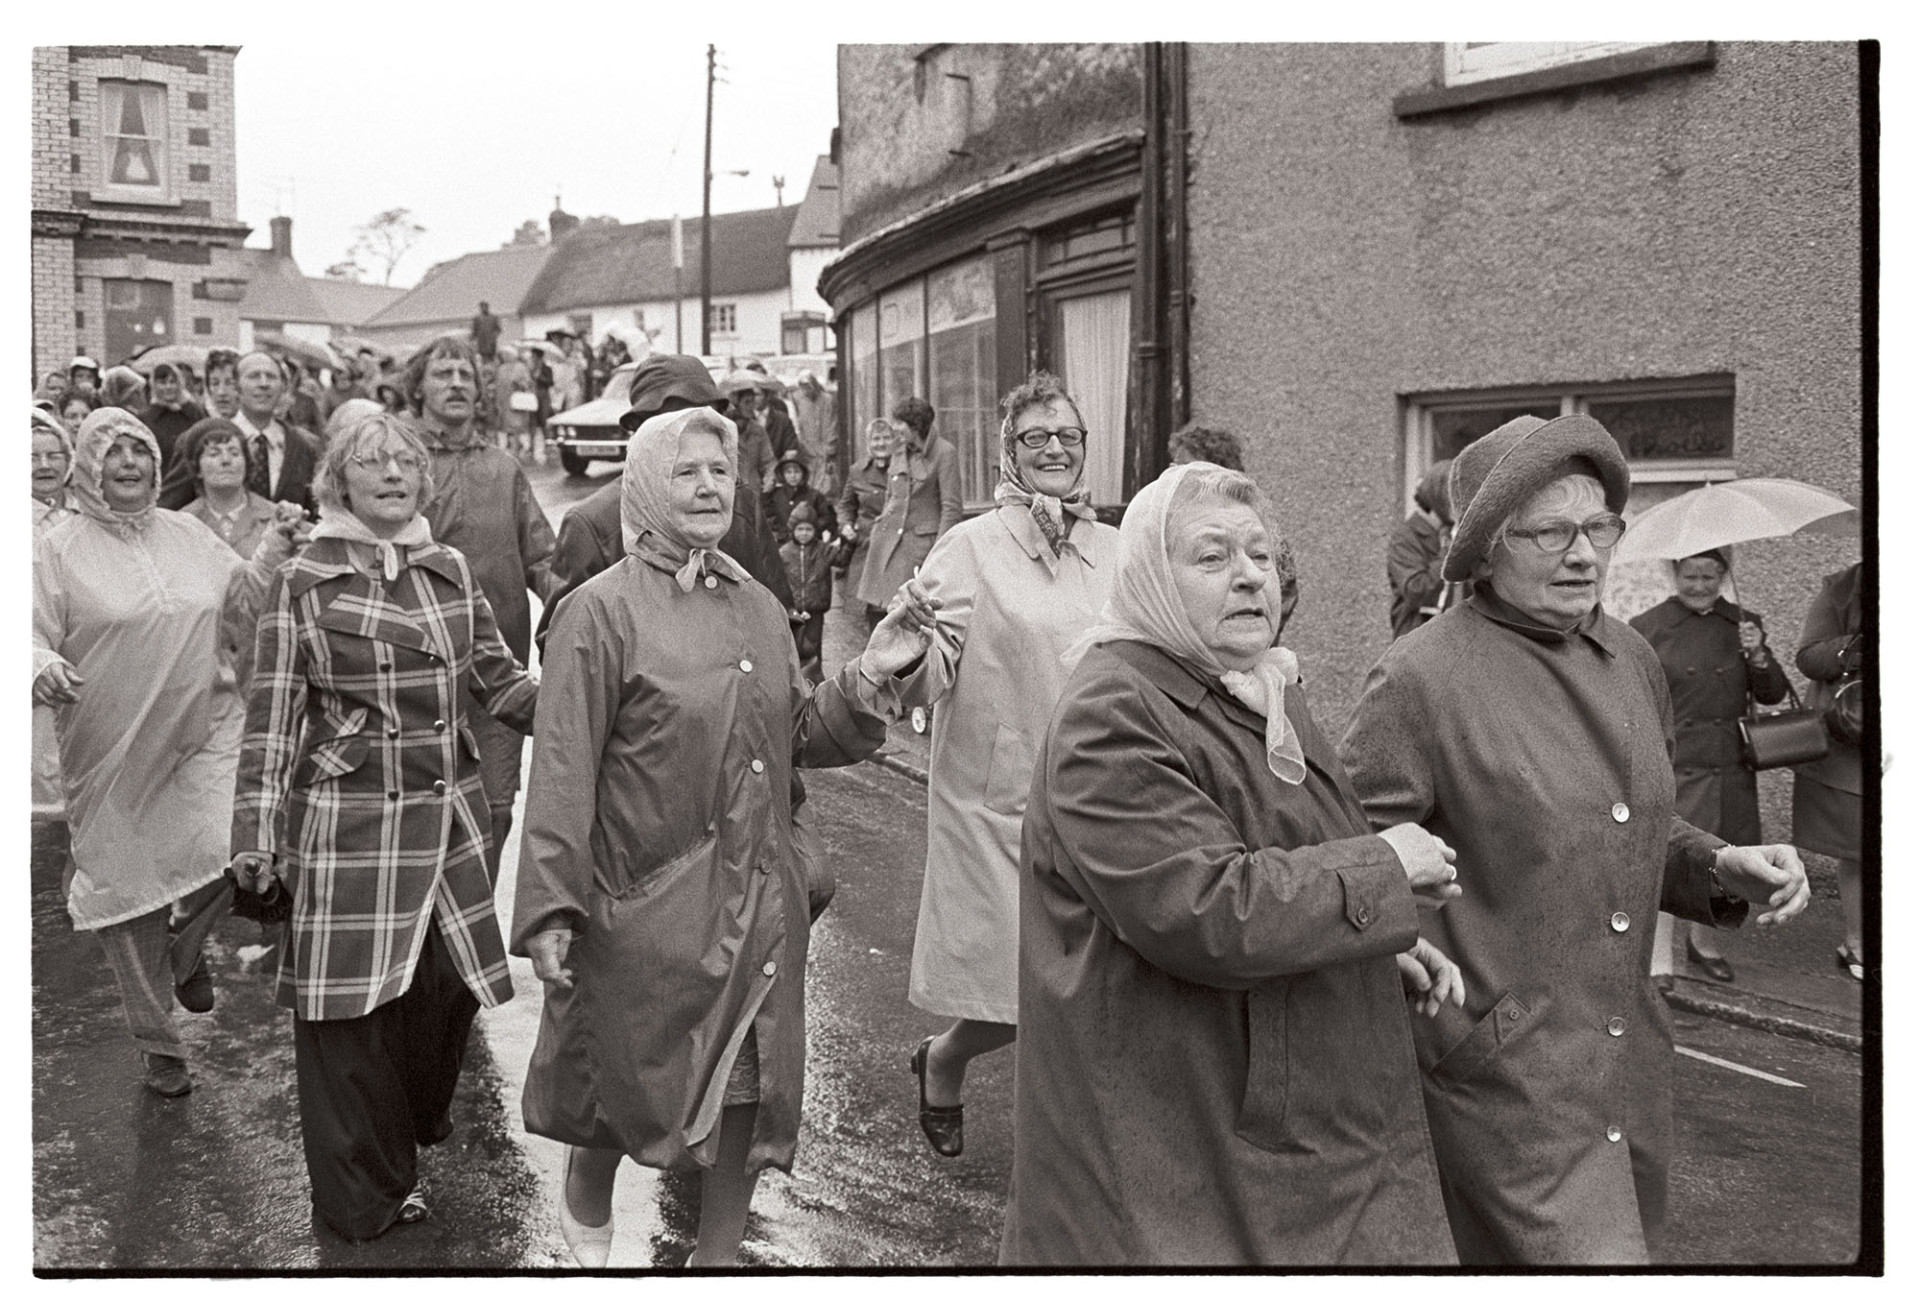 Women in Floral Dance through town in rain!
[A group of women wearing raincoats taking part in the Floral Dance through Hatherleigh, in the rain.]